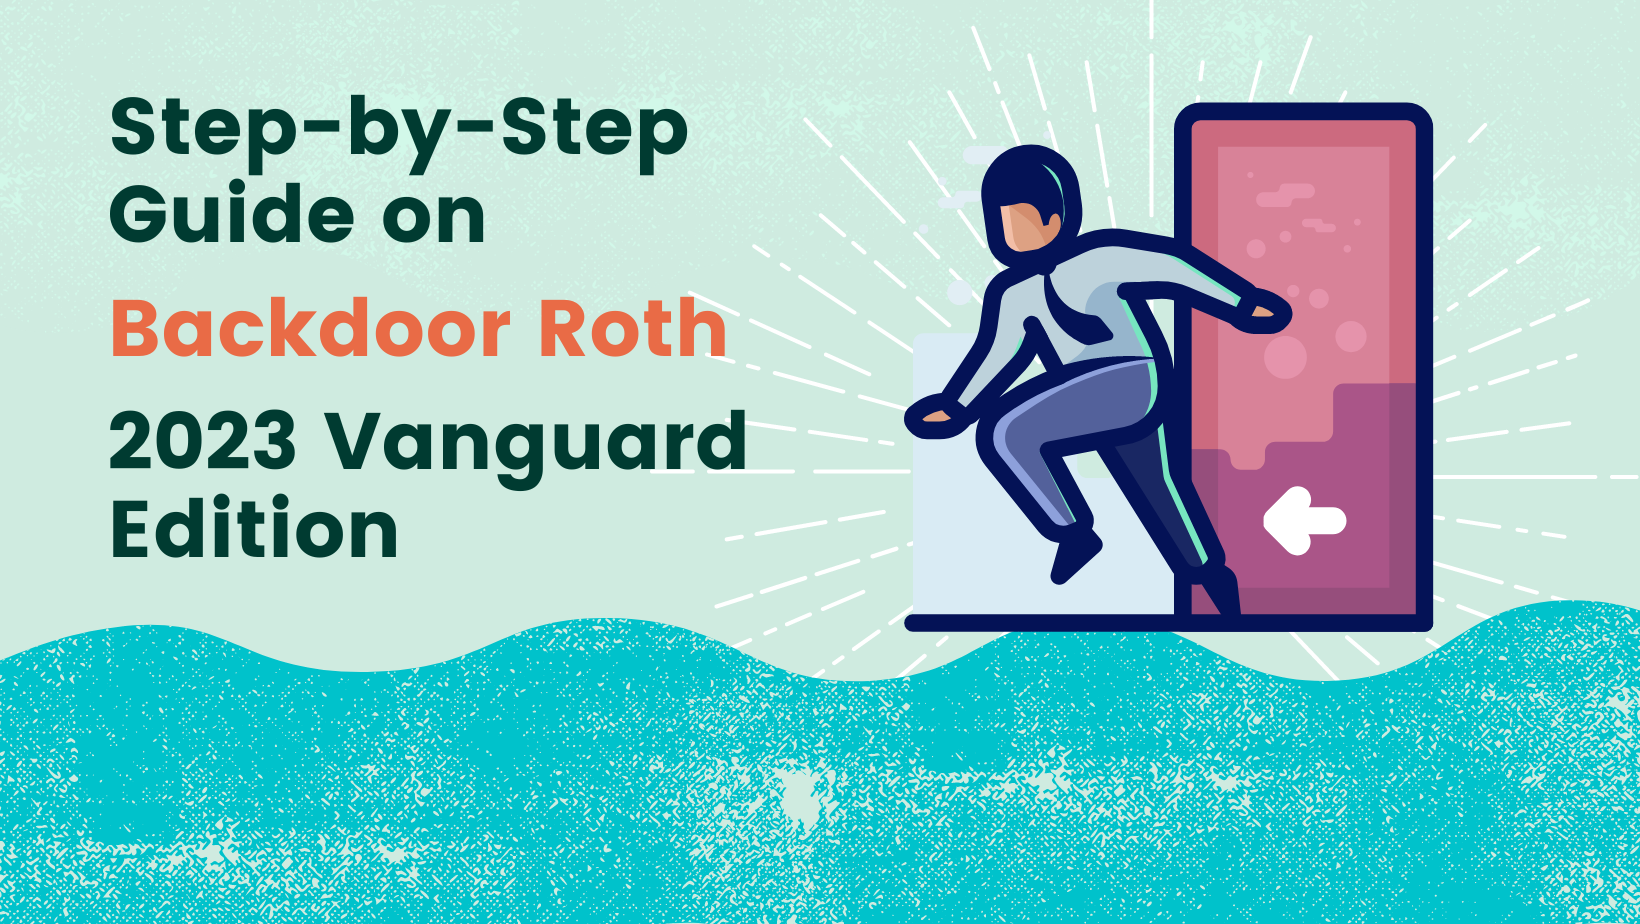 Step-by-Step Guide on Backdoor Roth (2023 Vanguard Edition)